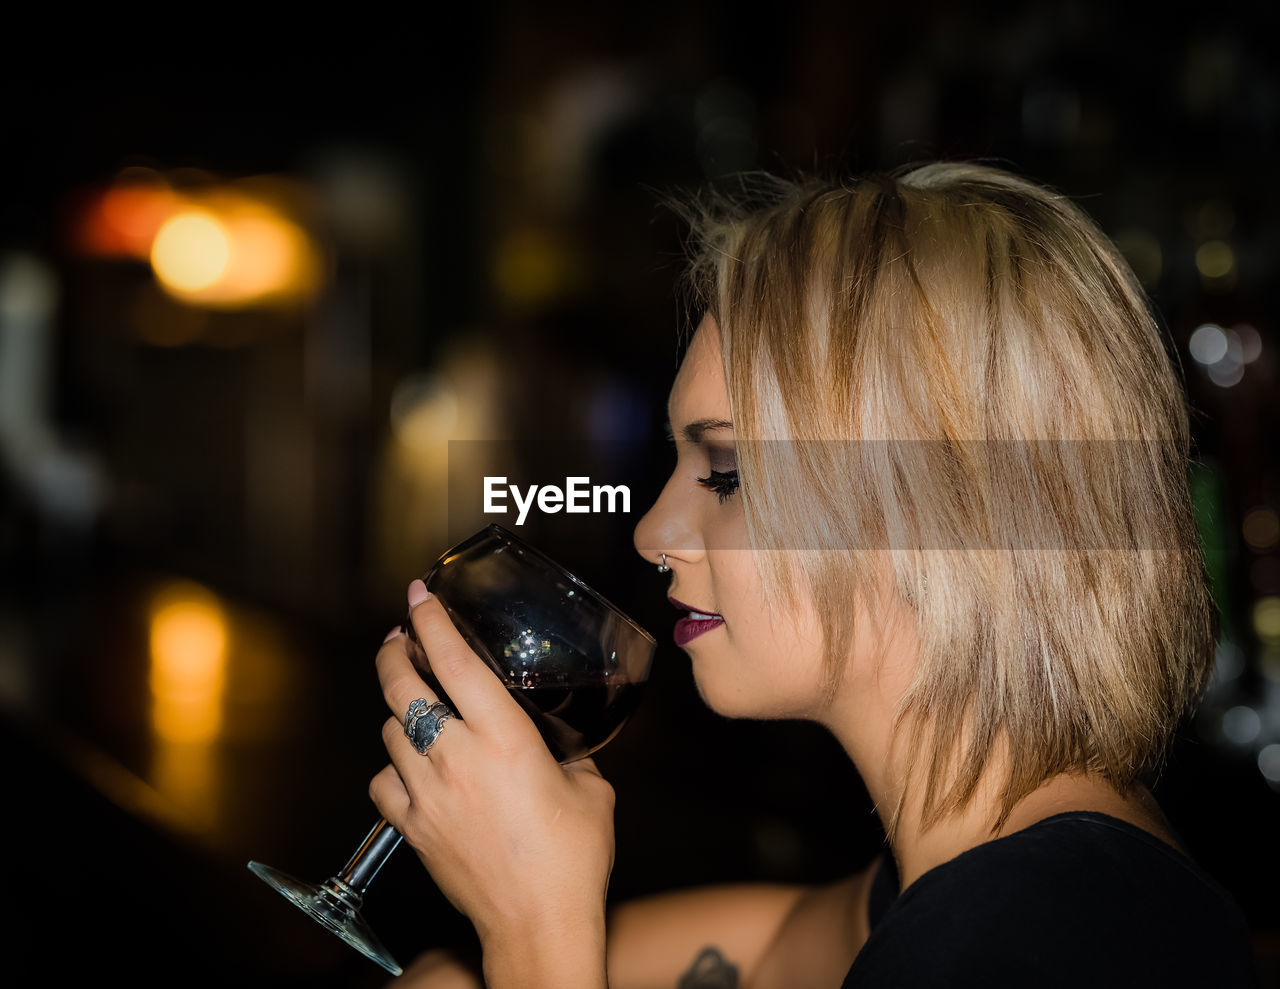 Side view of woman drinking wine at bar